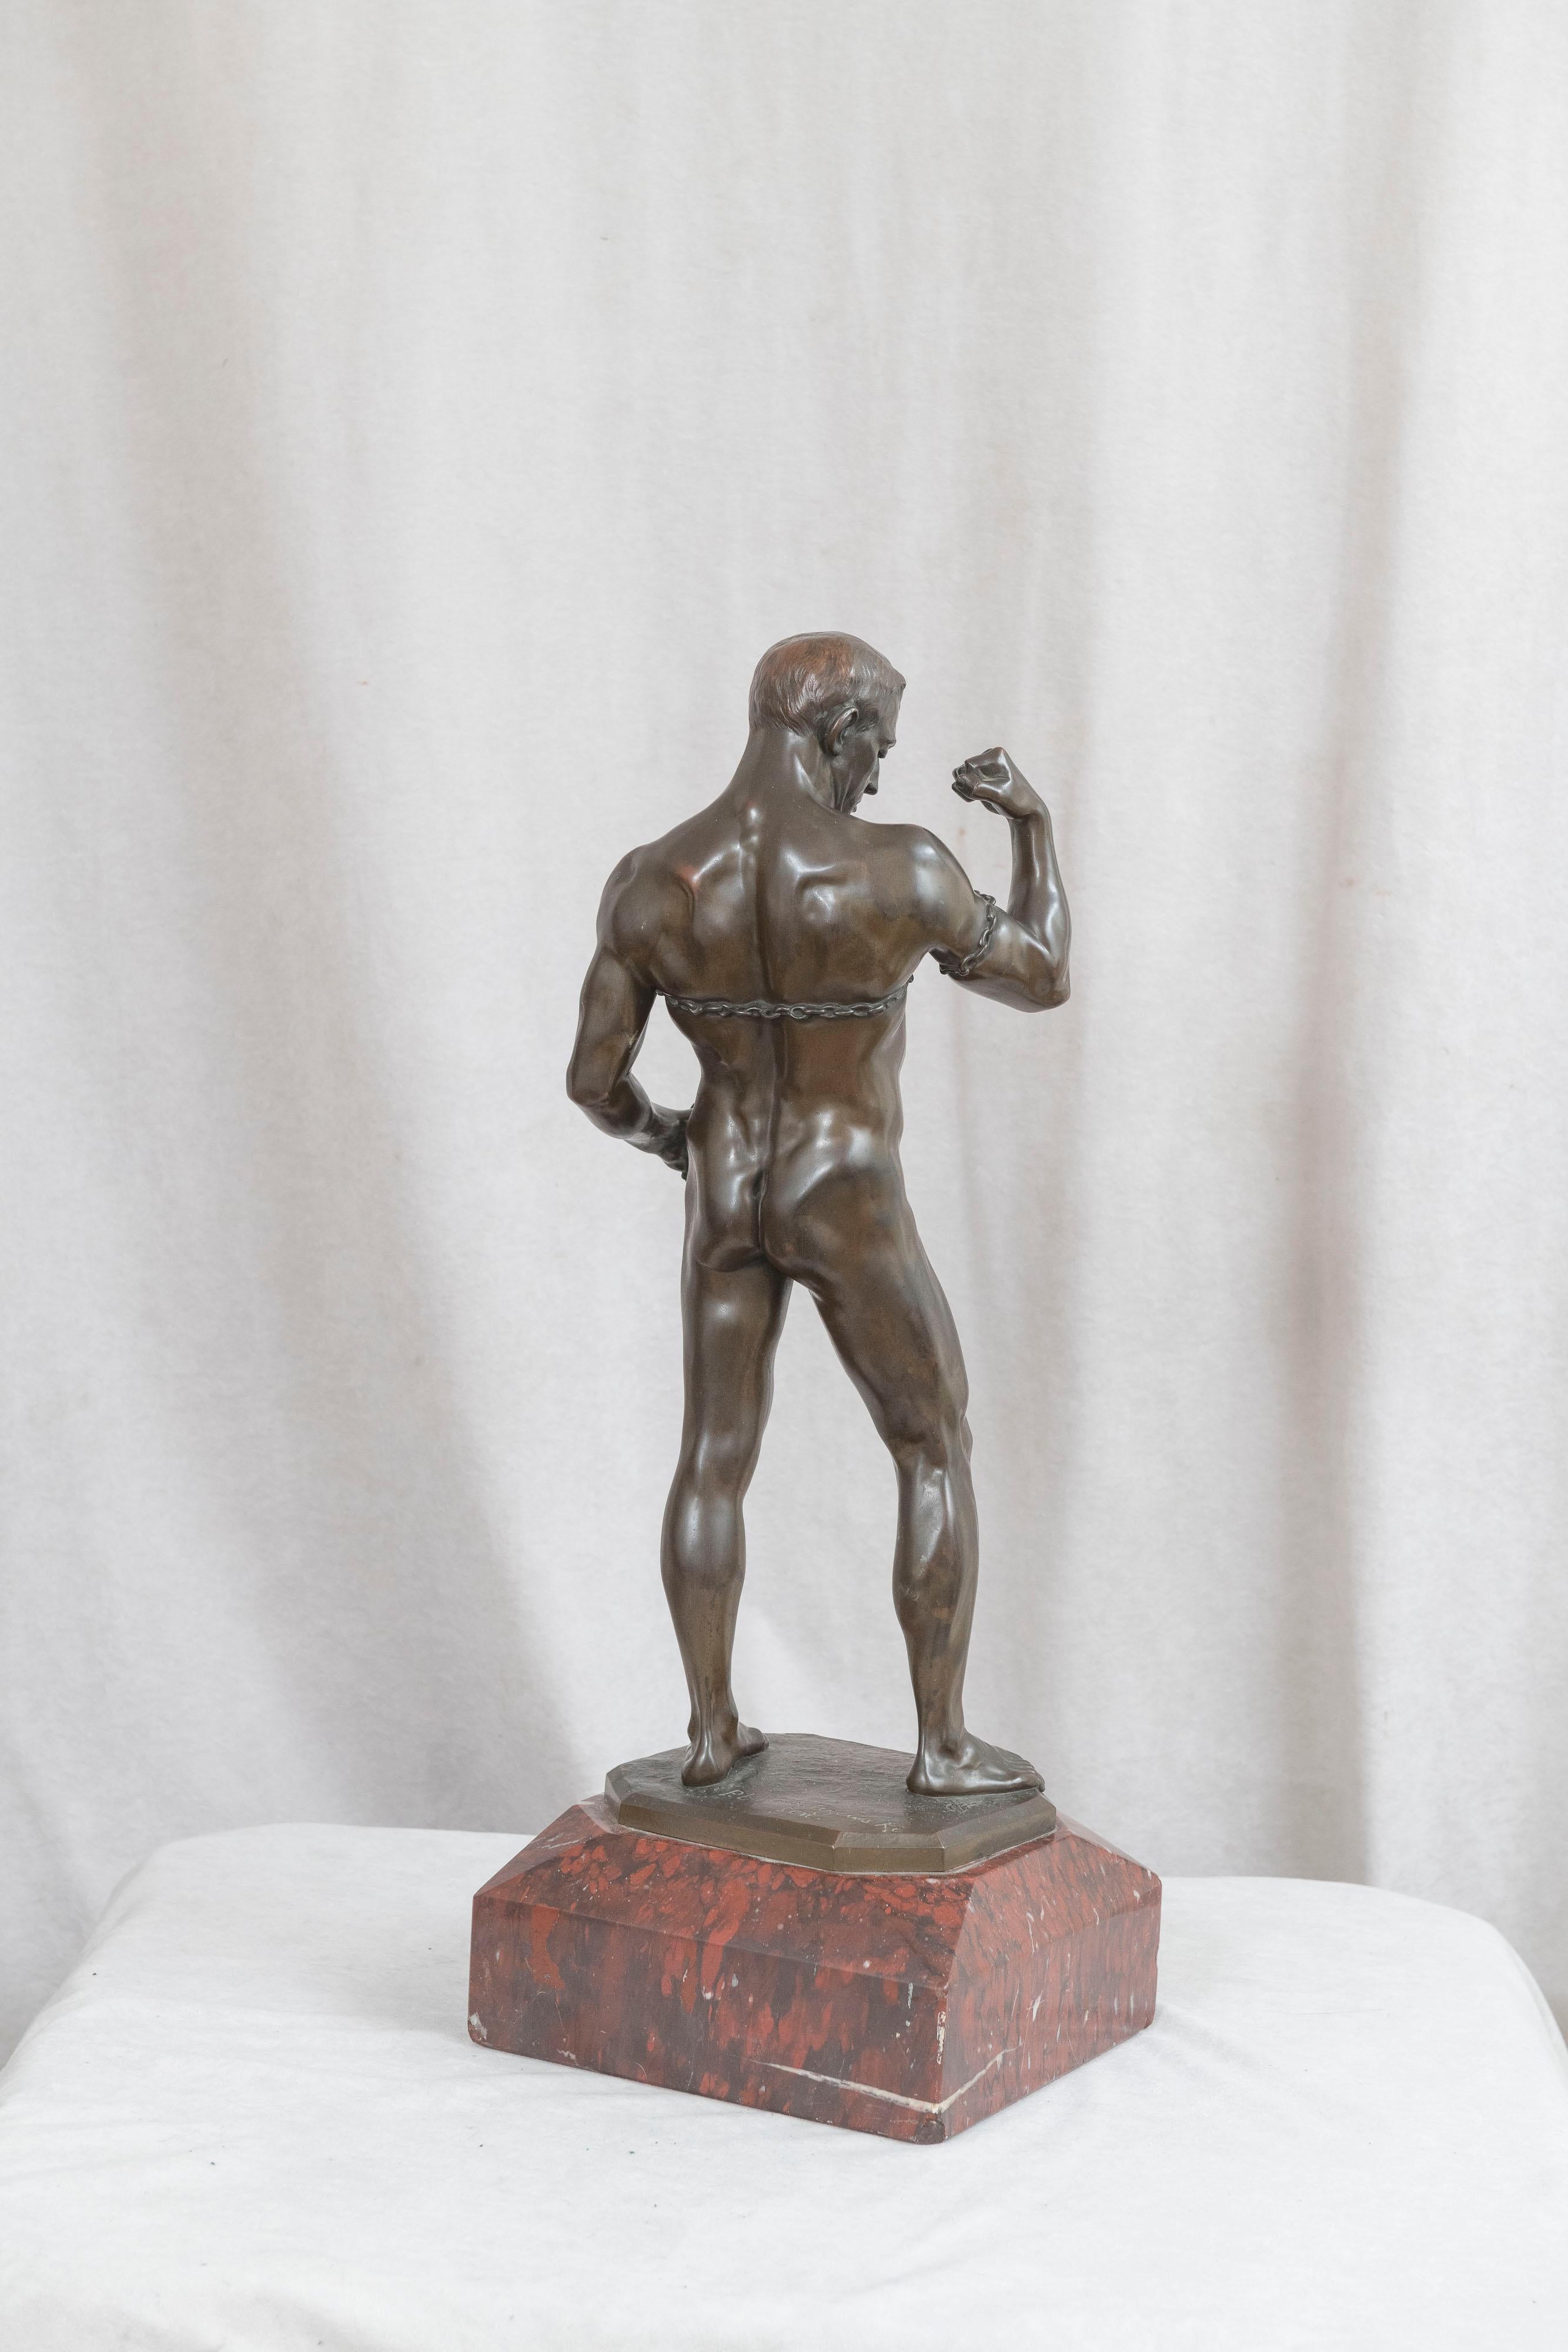 Hand-Crafted German Bronze Figure of a Nude Male Strongman Breaking out of Chains, ca. 1895